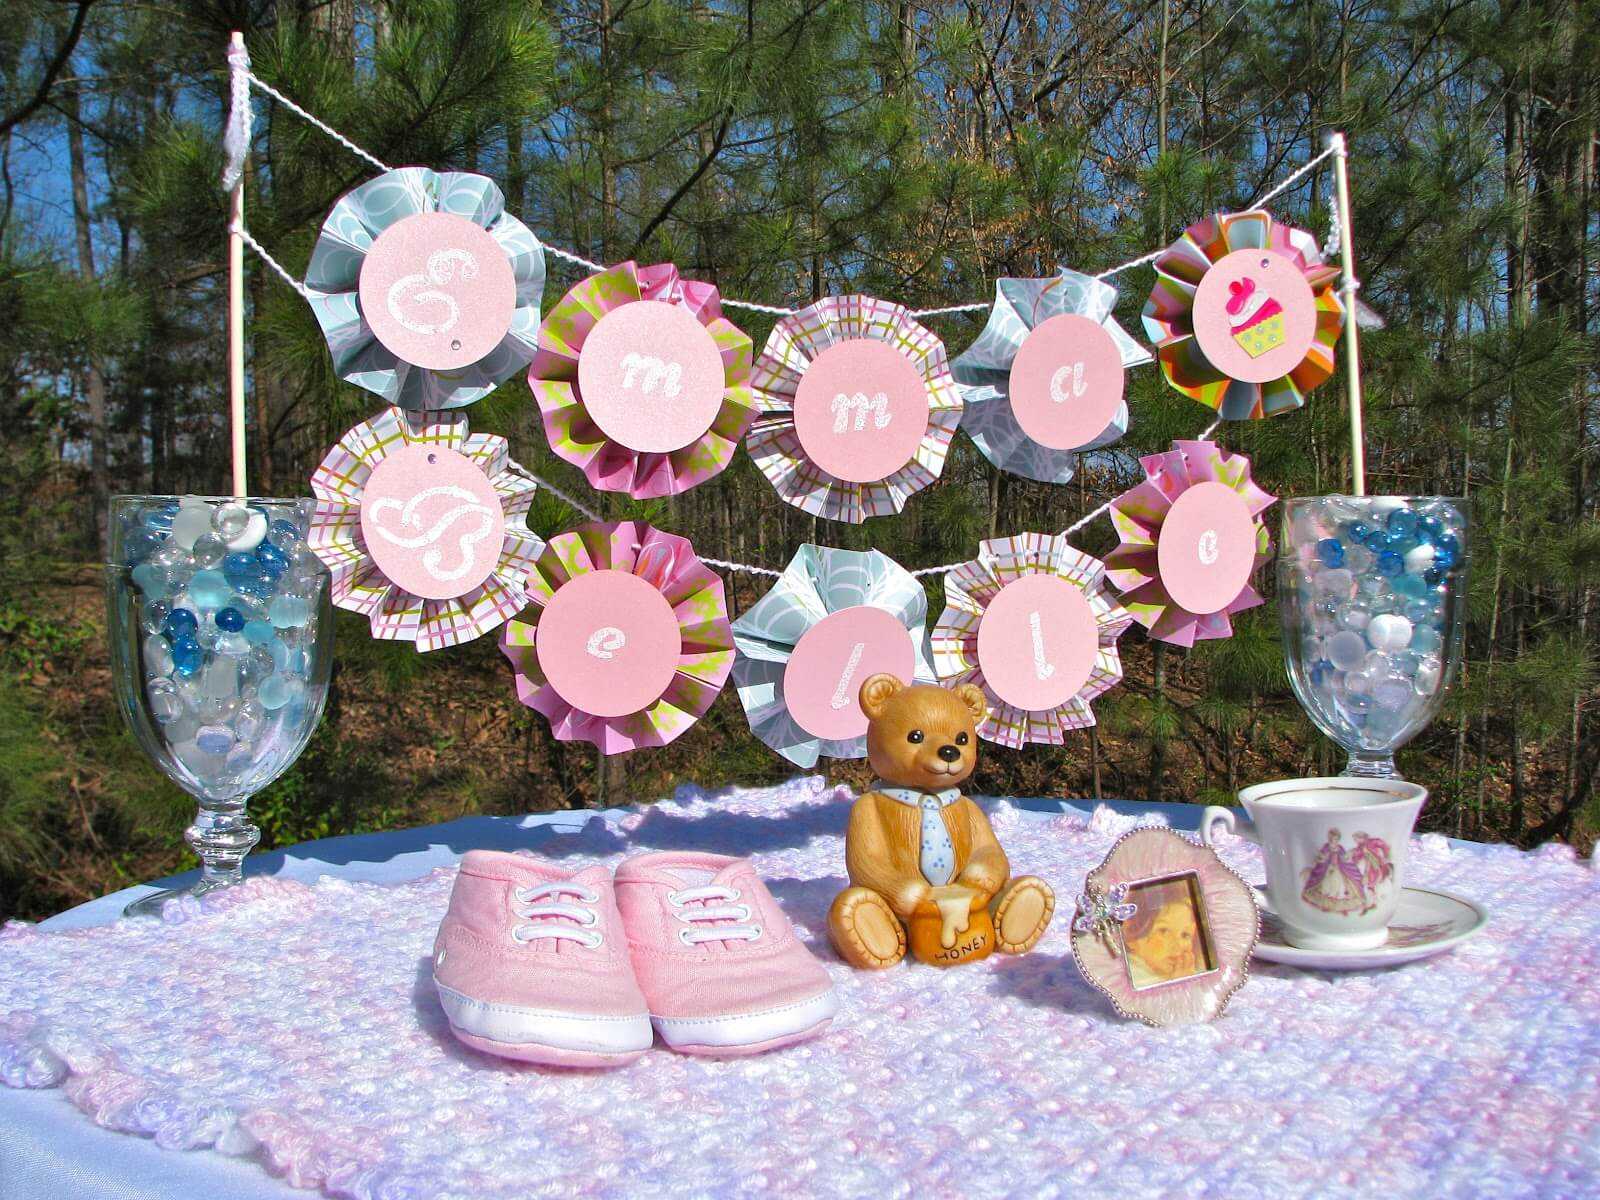 Lots Of Baby Shower Banner Ideas (+ Decorations) In Diy Baby Shower Banner Template